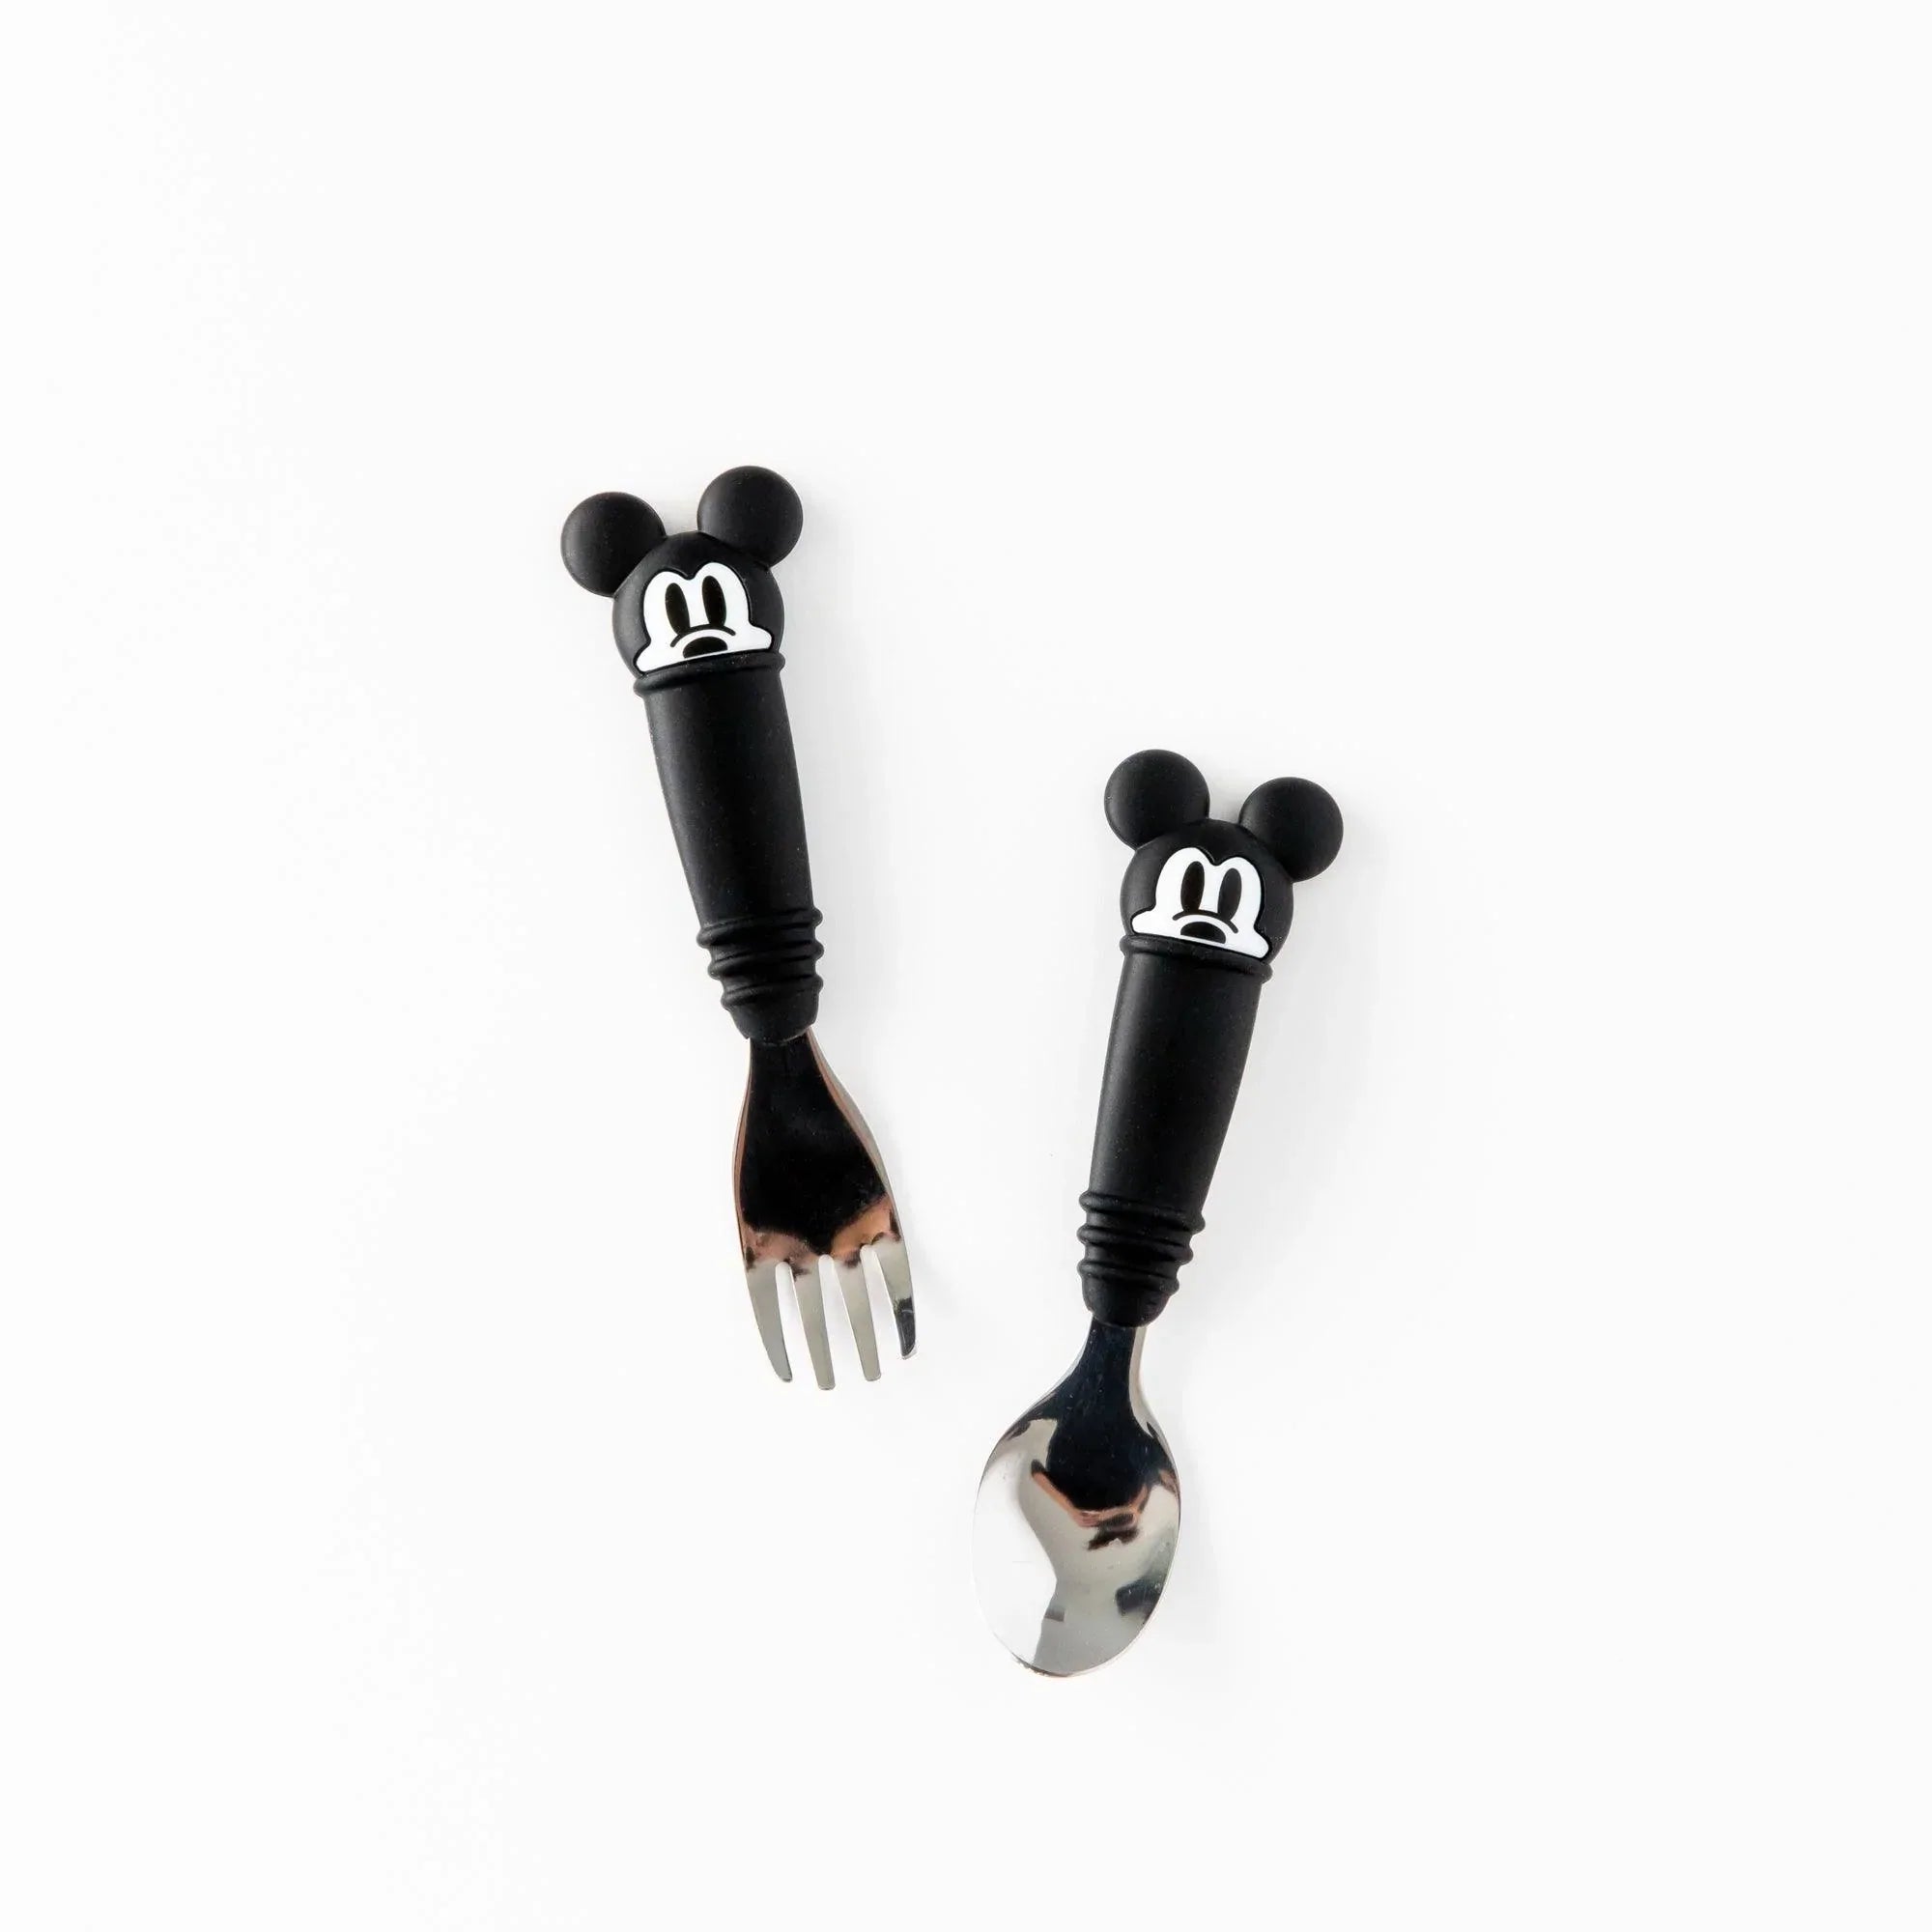 Bumkins Disney - Silicone Dipping Spoons, Mickey Mouse